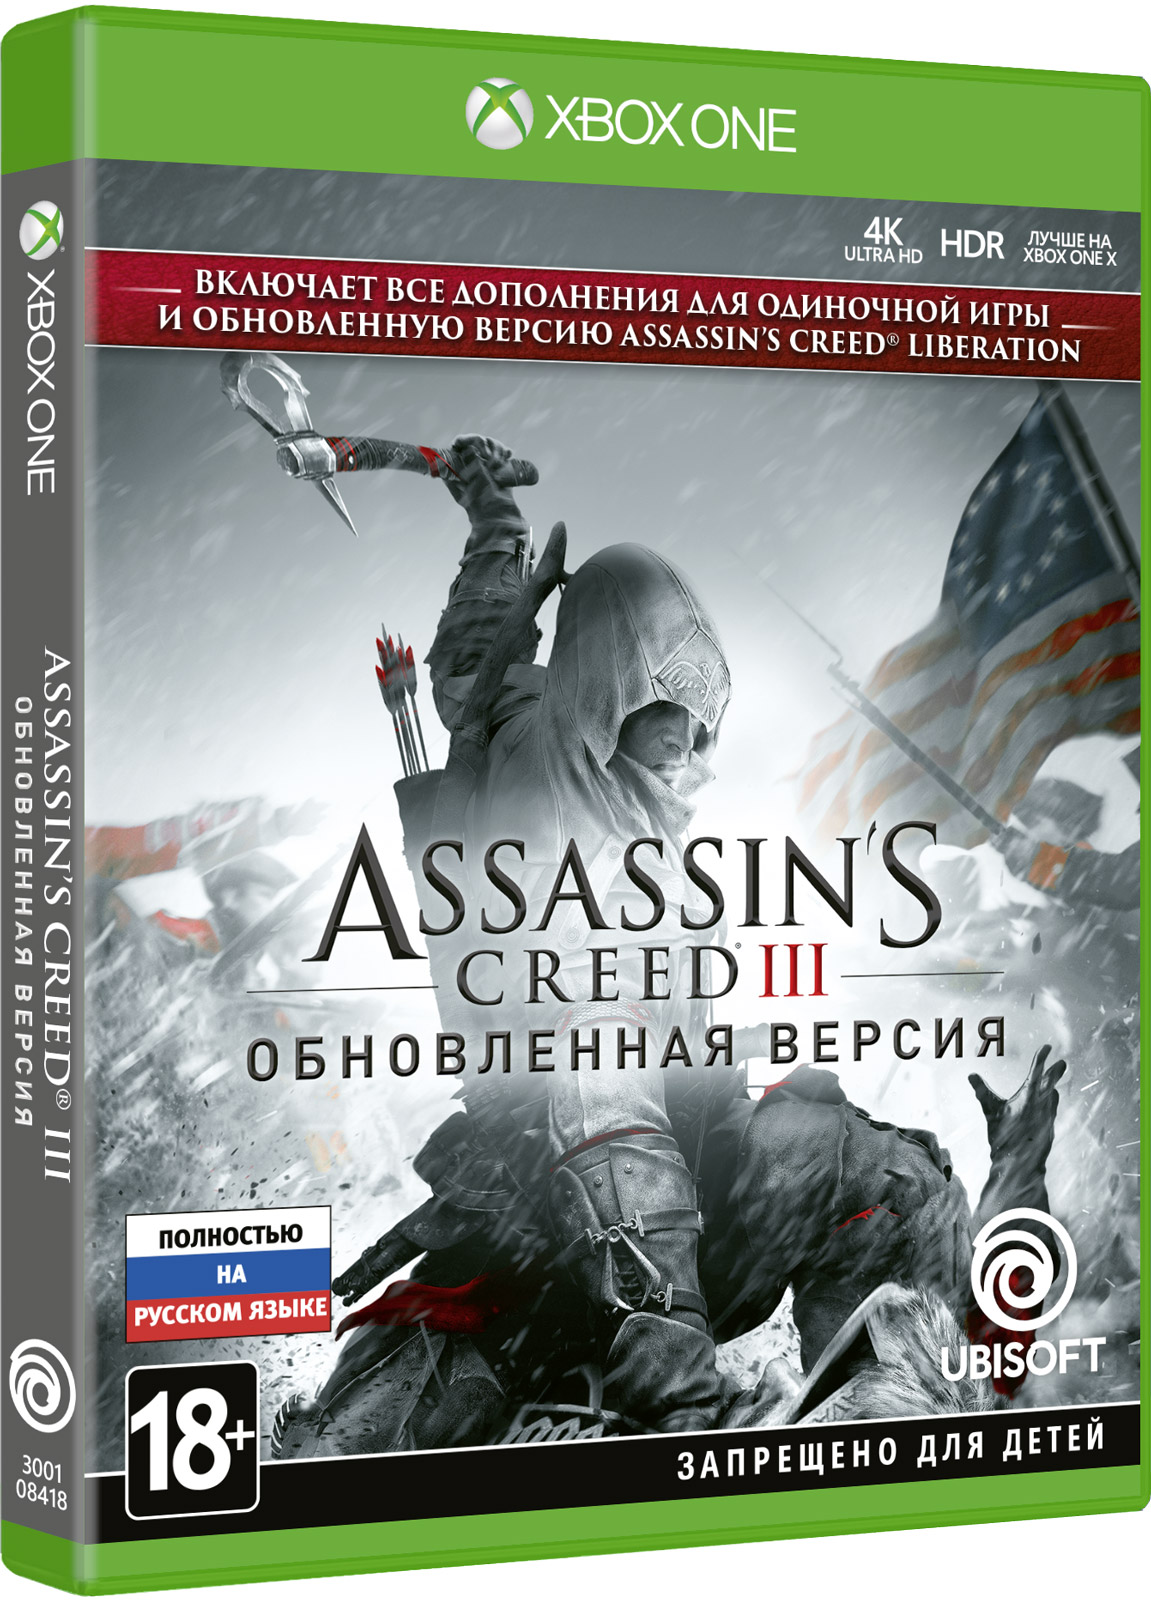 Assassins игра xbox. Ассасин Крид 3 Xbox one. Assassin's Creed Rogue Xbox 360. Assassin's Creed 3 Remastered ps4. Ассасин 3 на ПС 4.